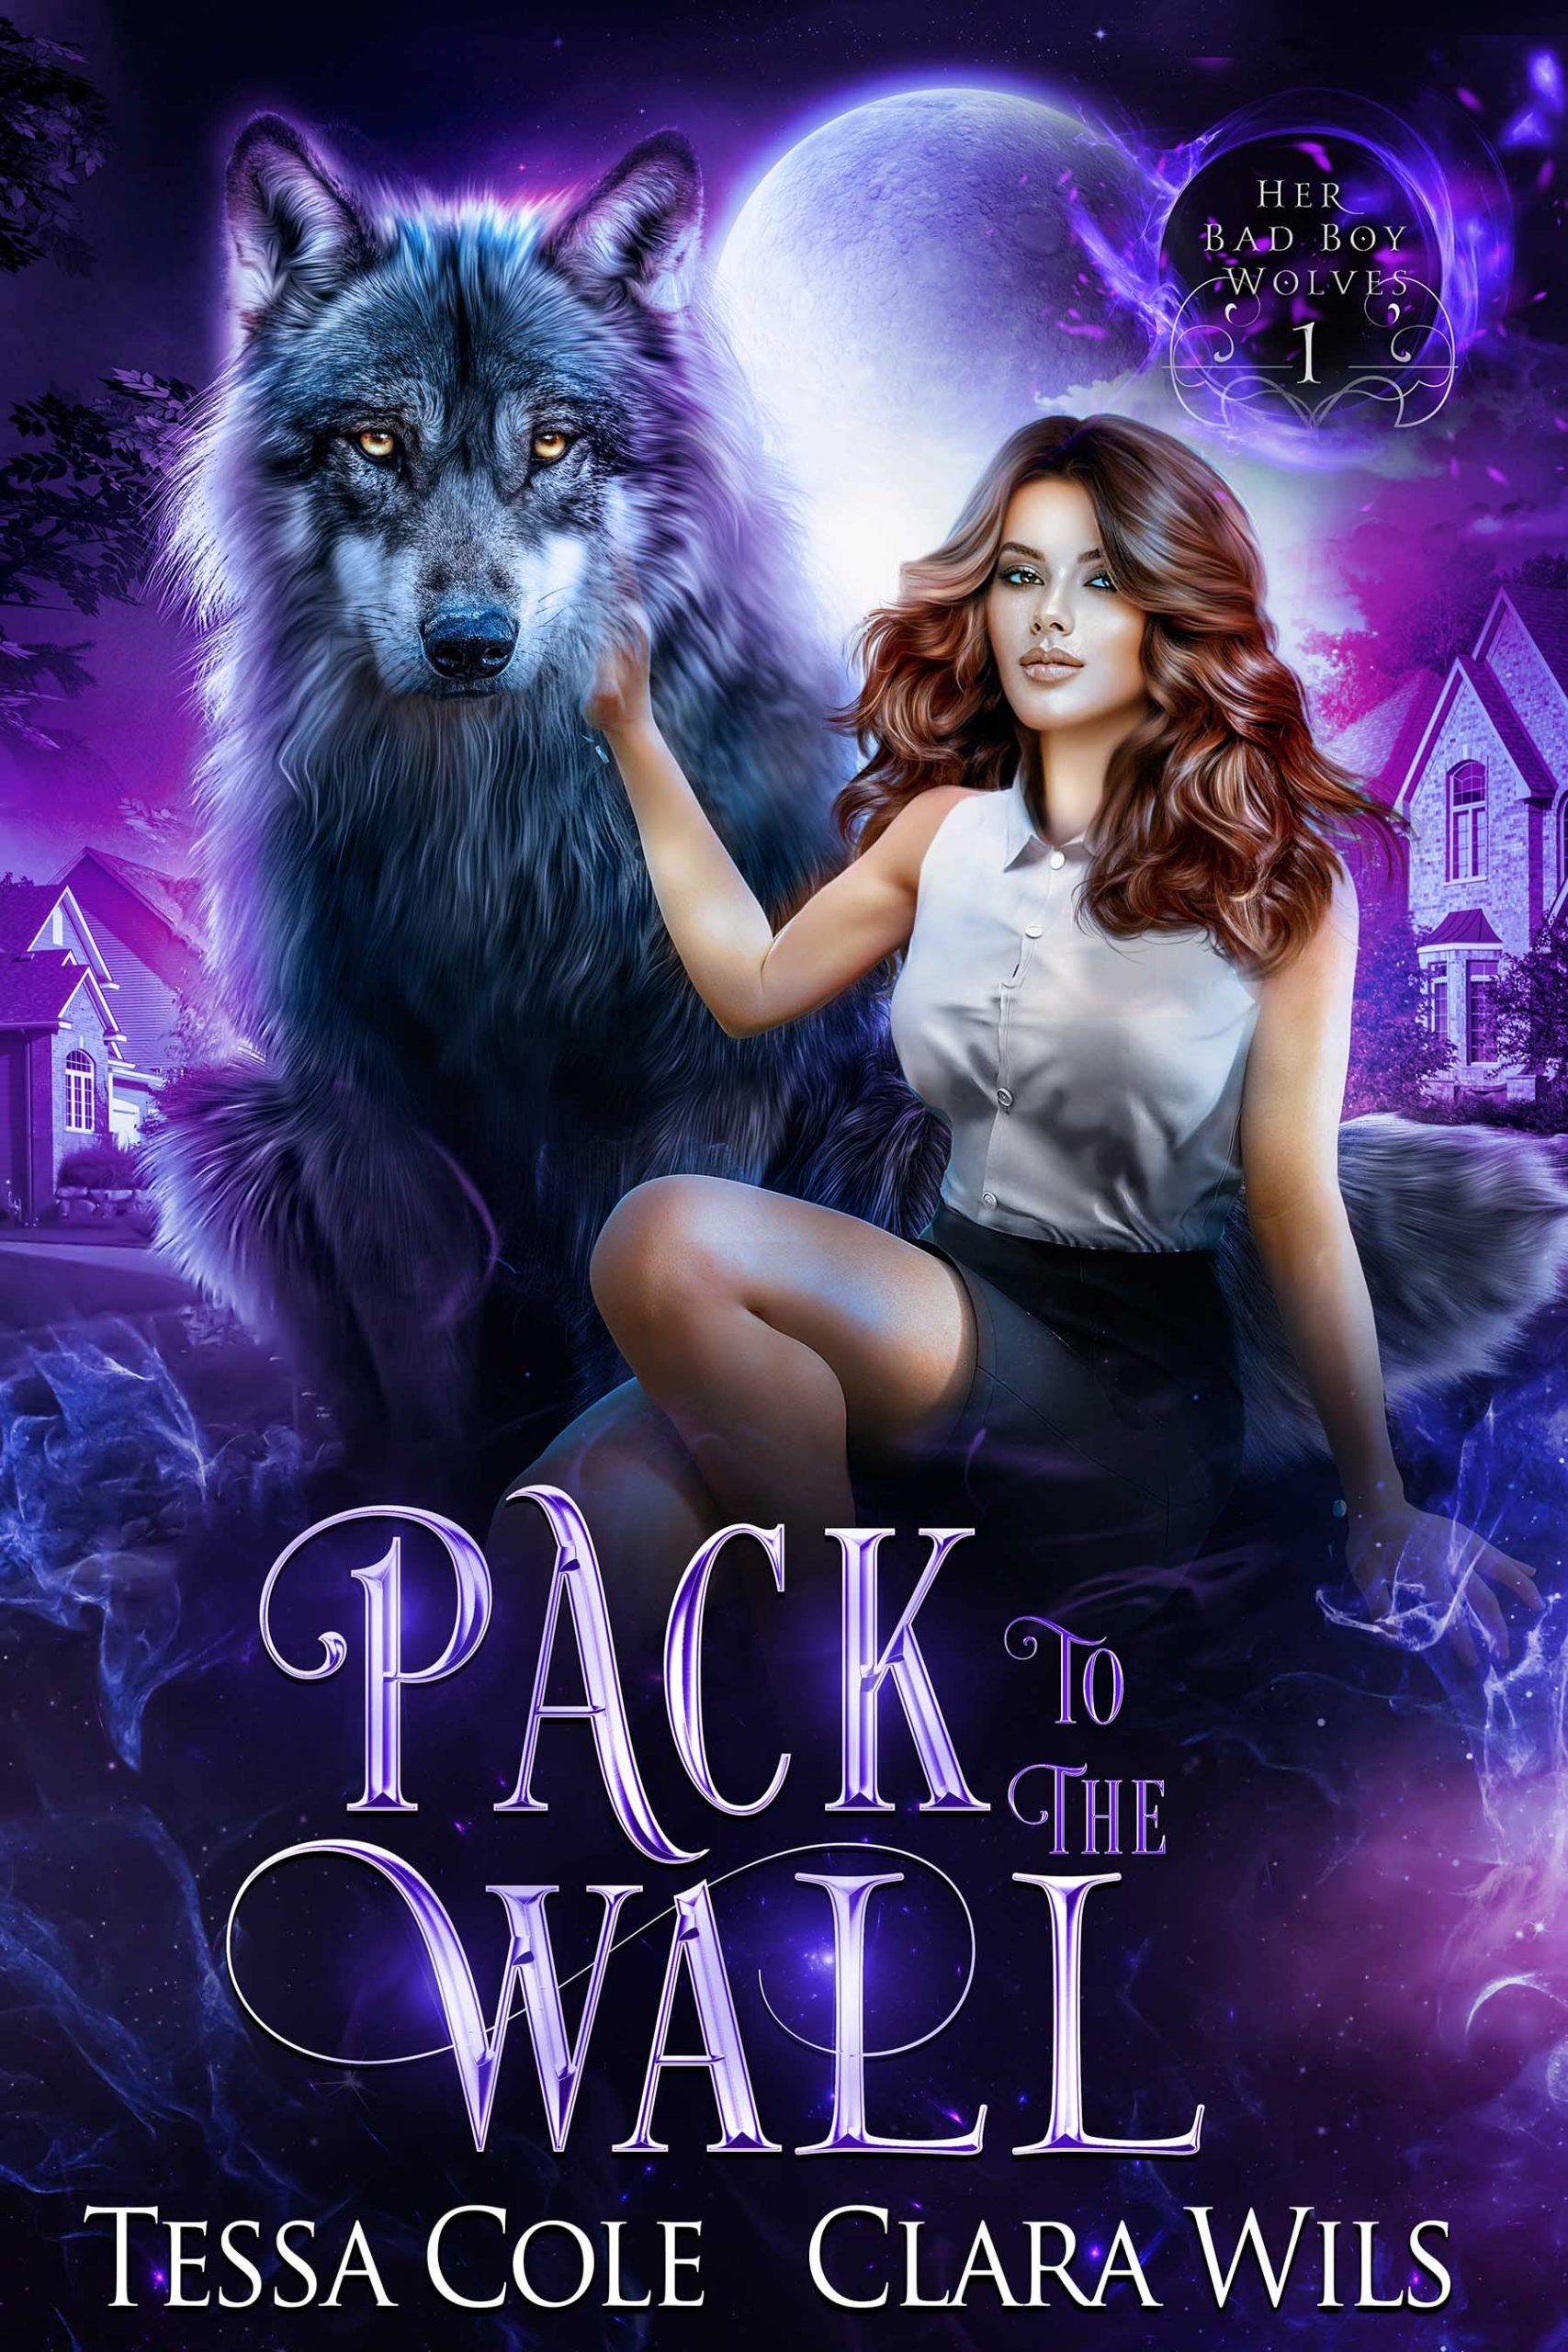 Wolf Devoted, a reverse harem paranormal romance and the sixth book in the Ensnared by the Pack series by Tessa Cole